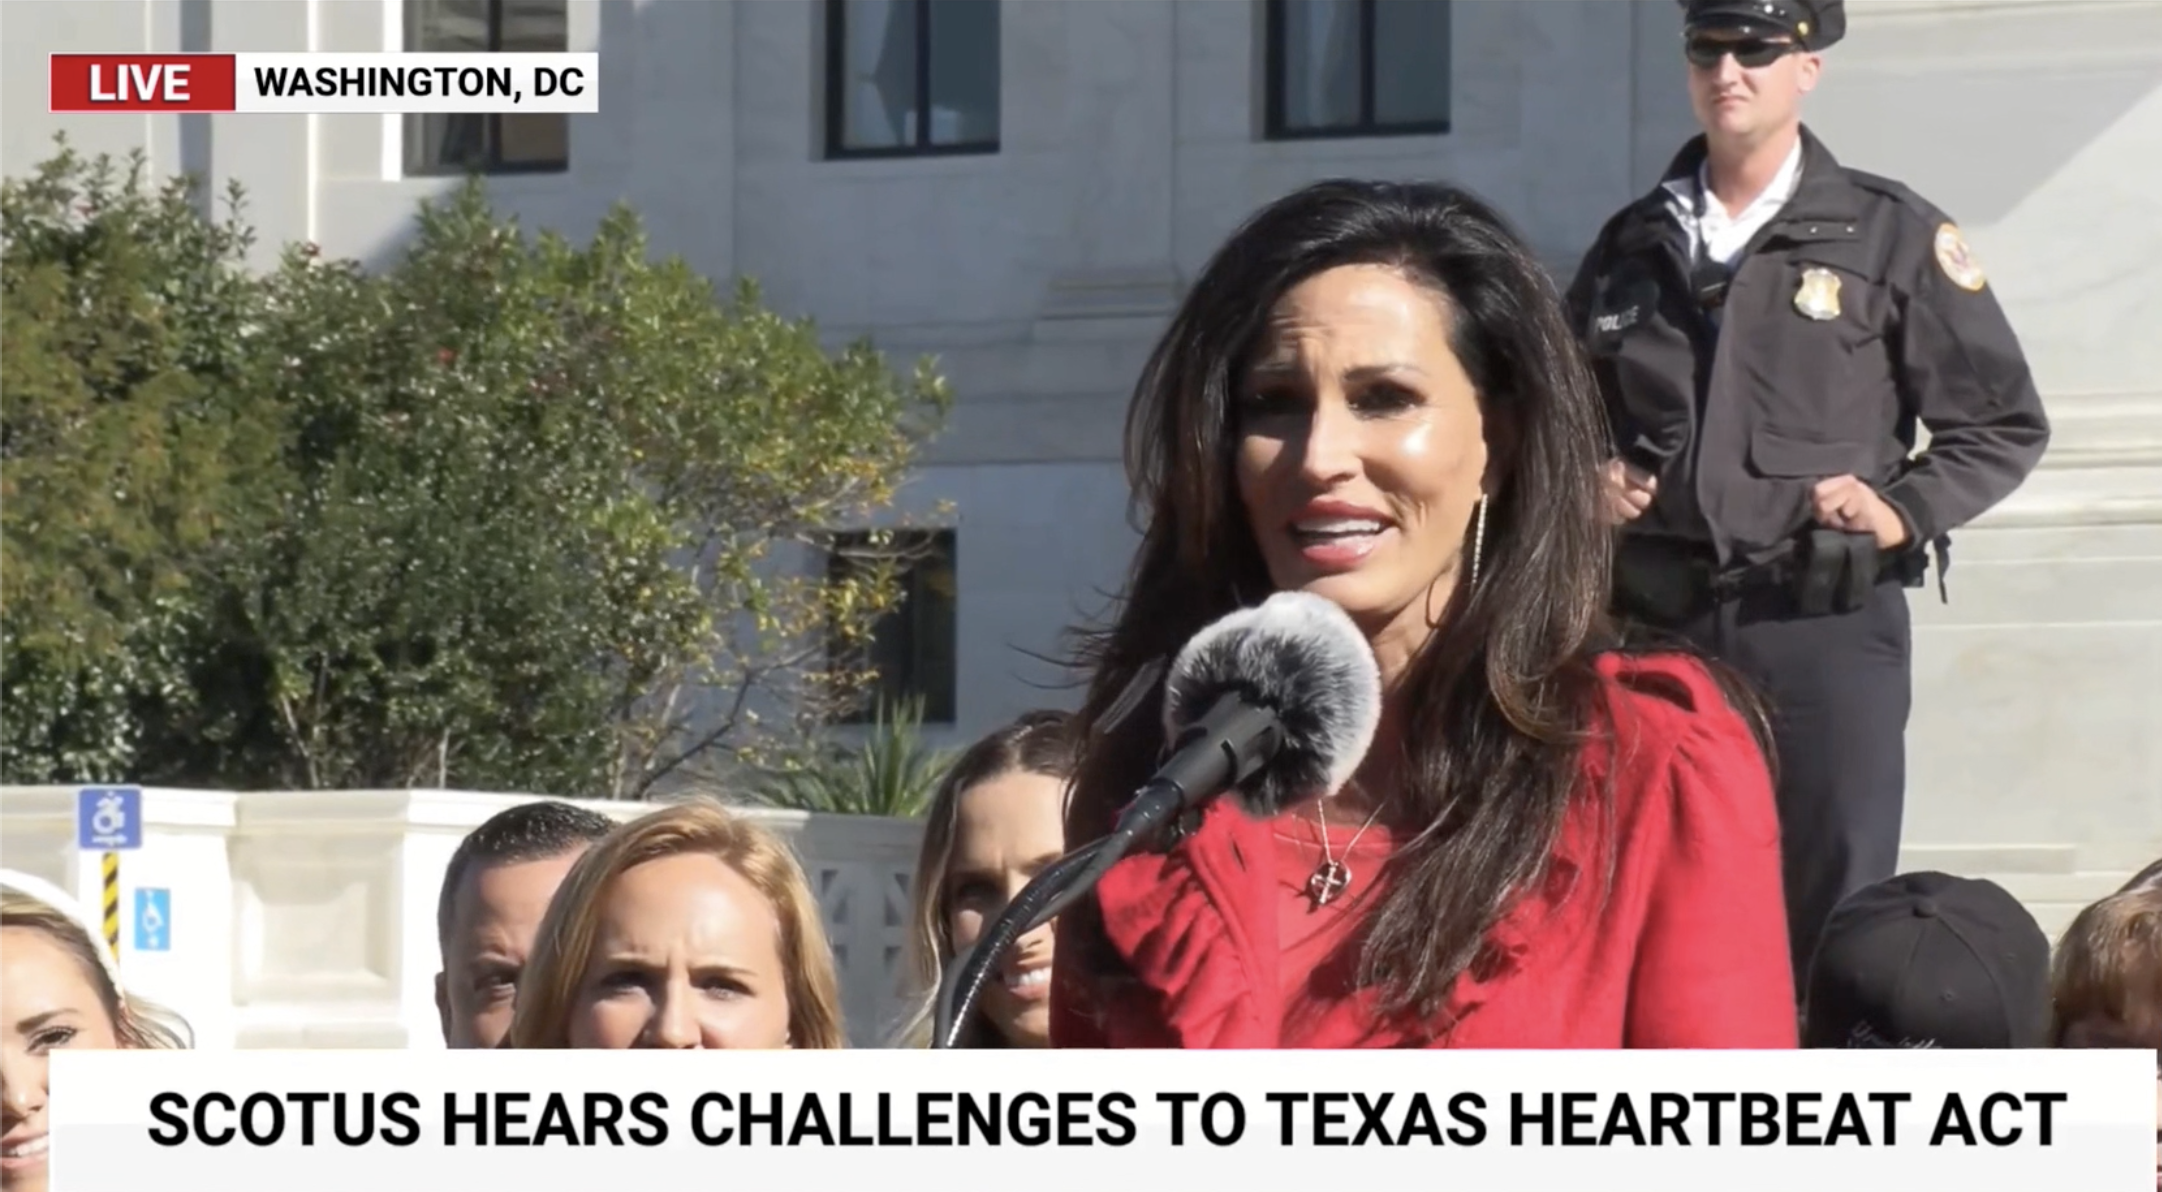 TODAY: CWA on the steps of the Supreme Court for TX Heartbeat Law